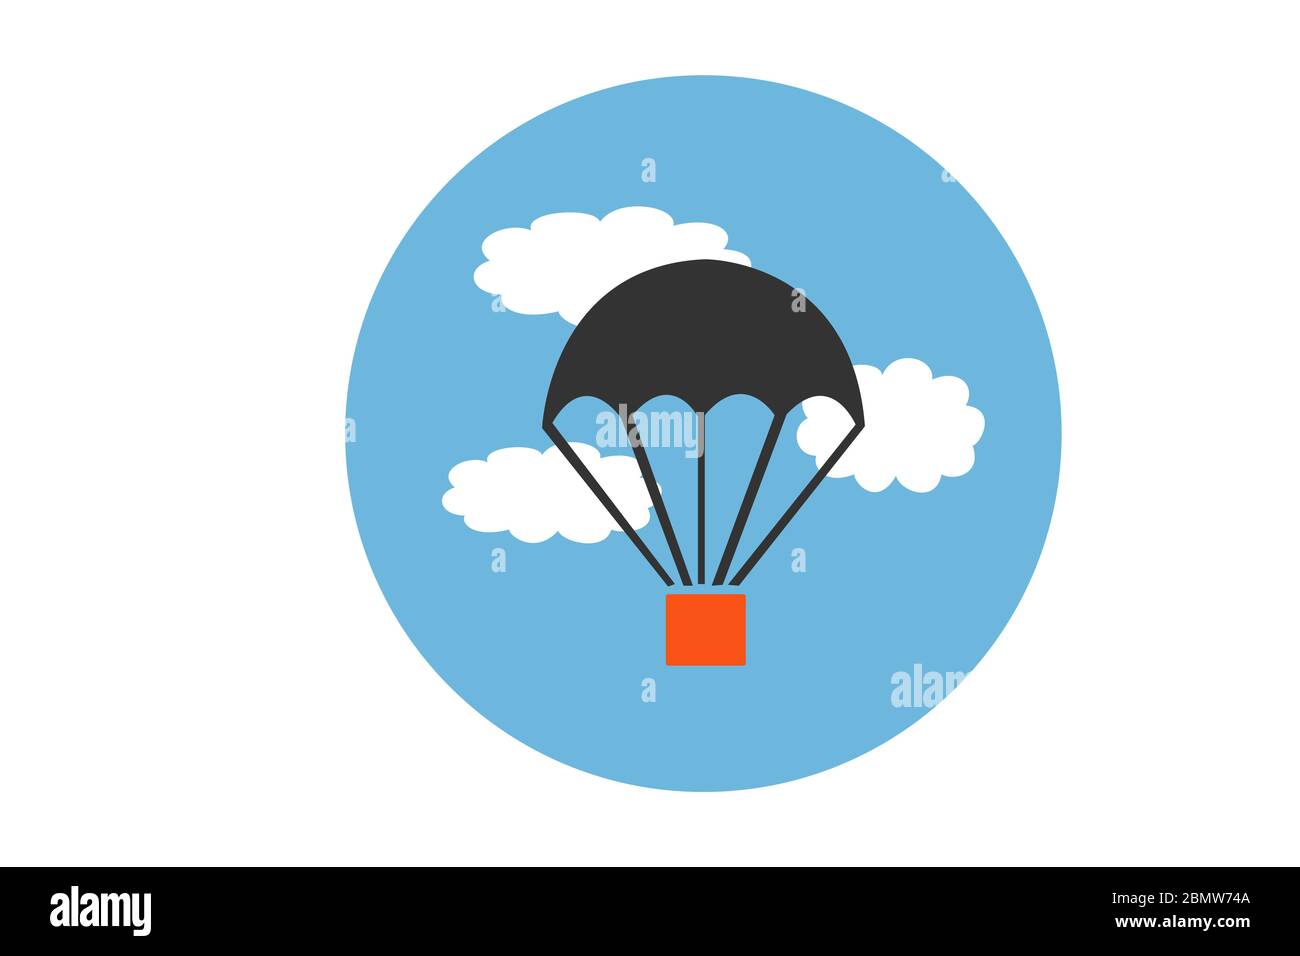 Jumping With Parachute Paragliding Parachute Stock Photo Alamy